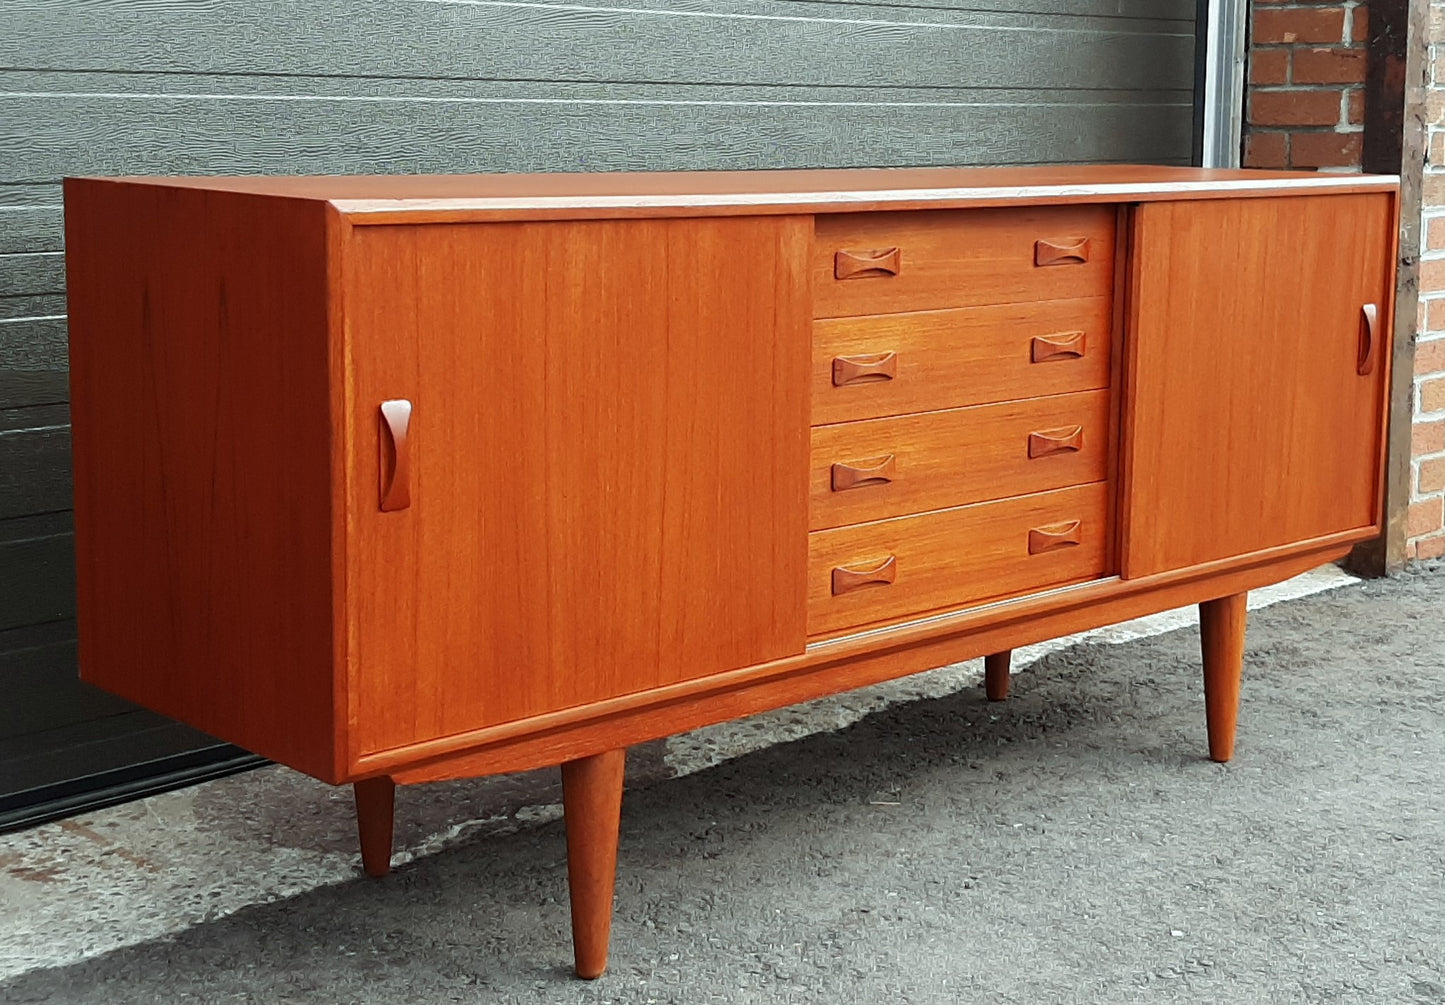 REFINISHED Danish MCM Teak Sideboard by IB Kofod-Larsen for Clausen and Son